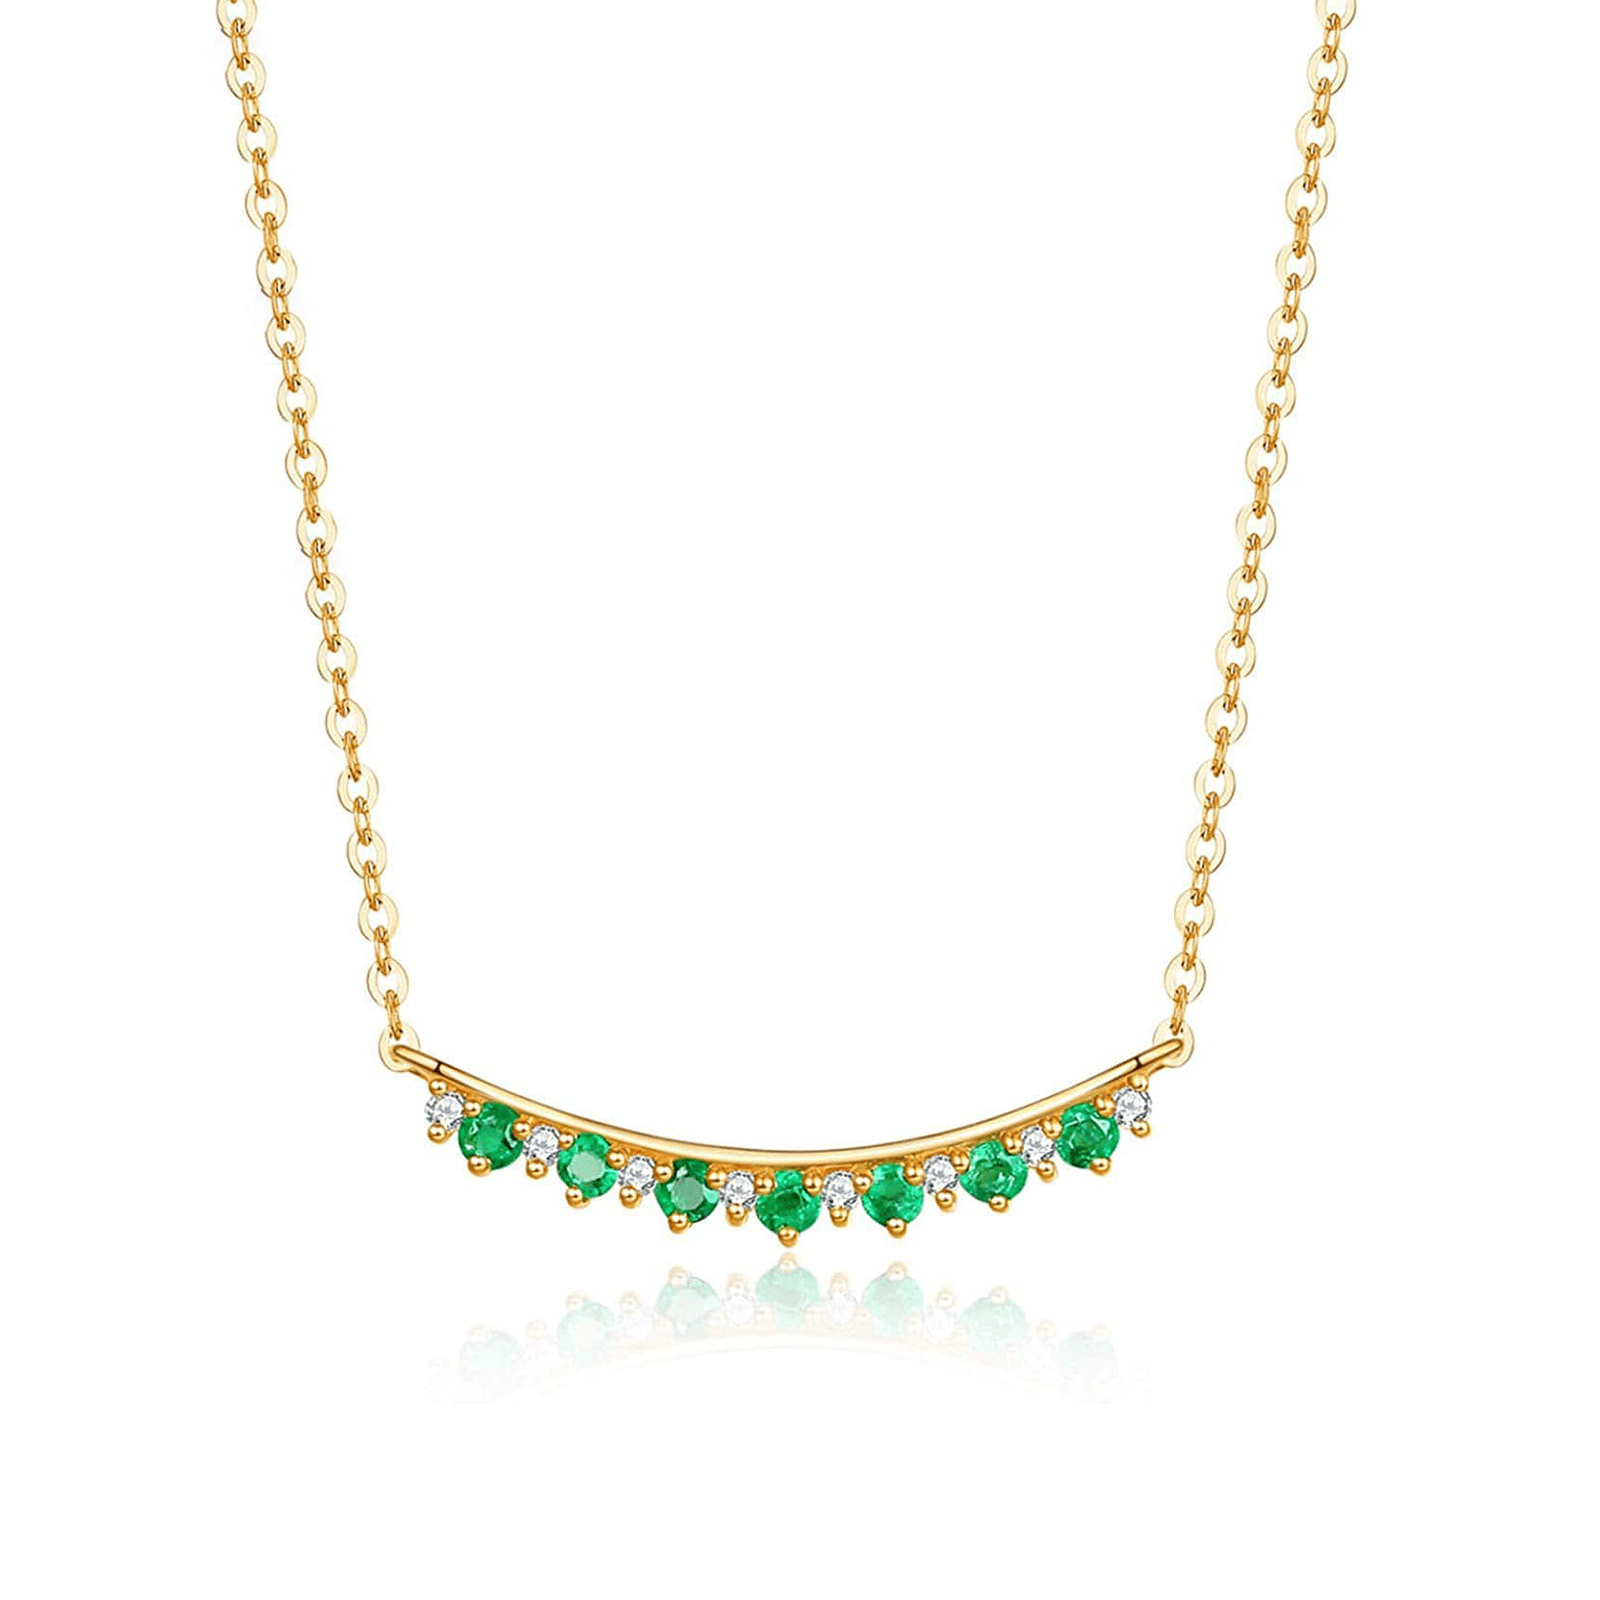 FANCIME "Mademoiselle Green" Green Emerald Smile 14K Yellow Gold Necklace Main